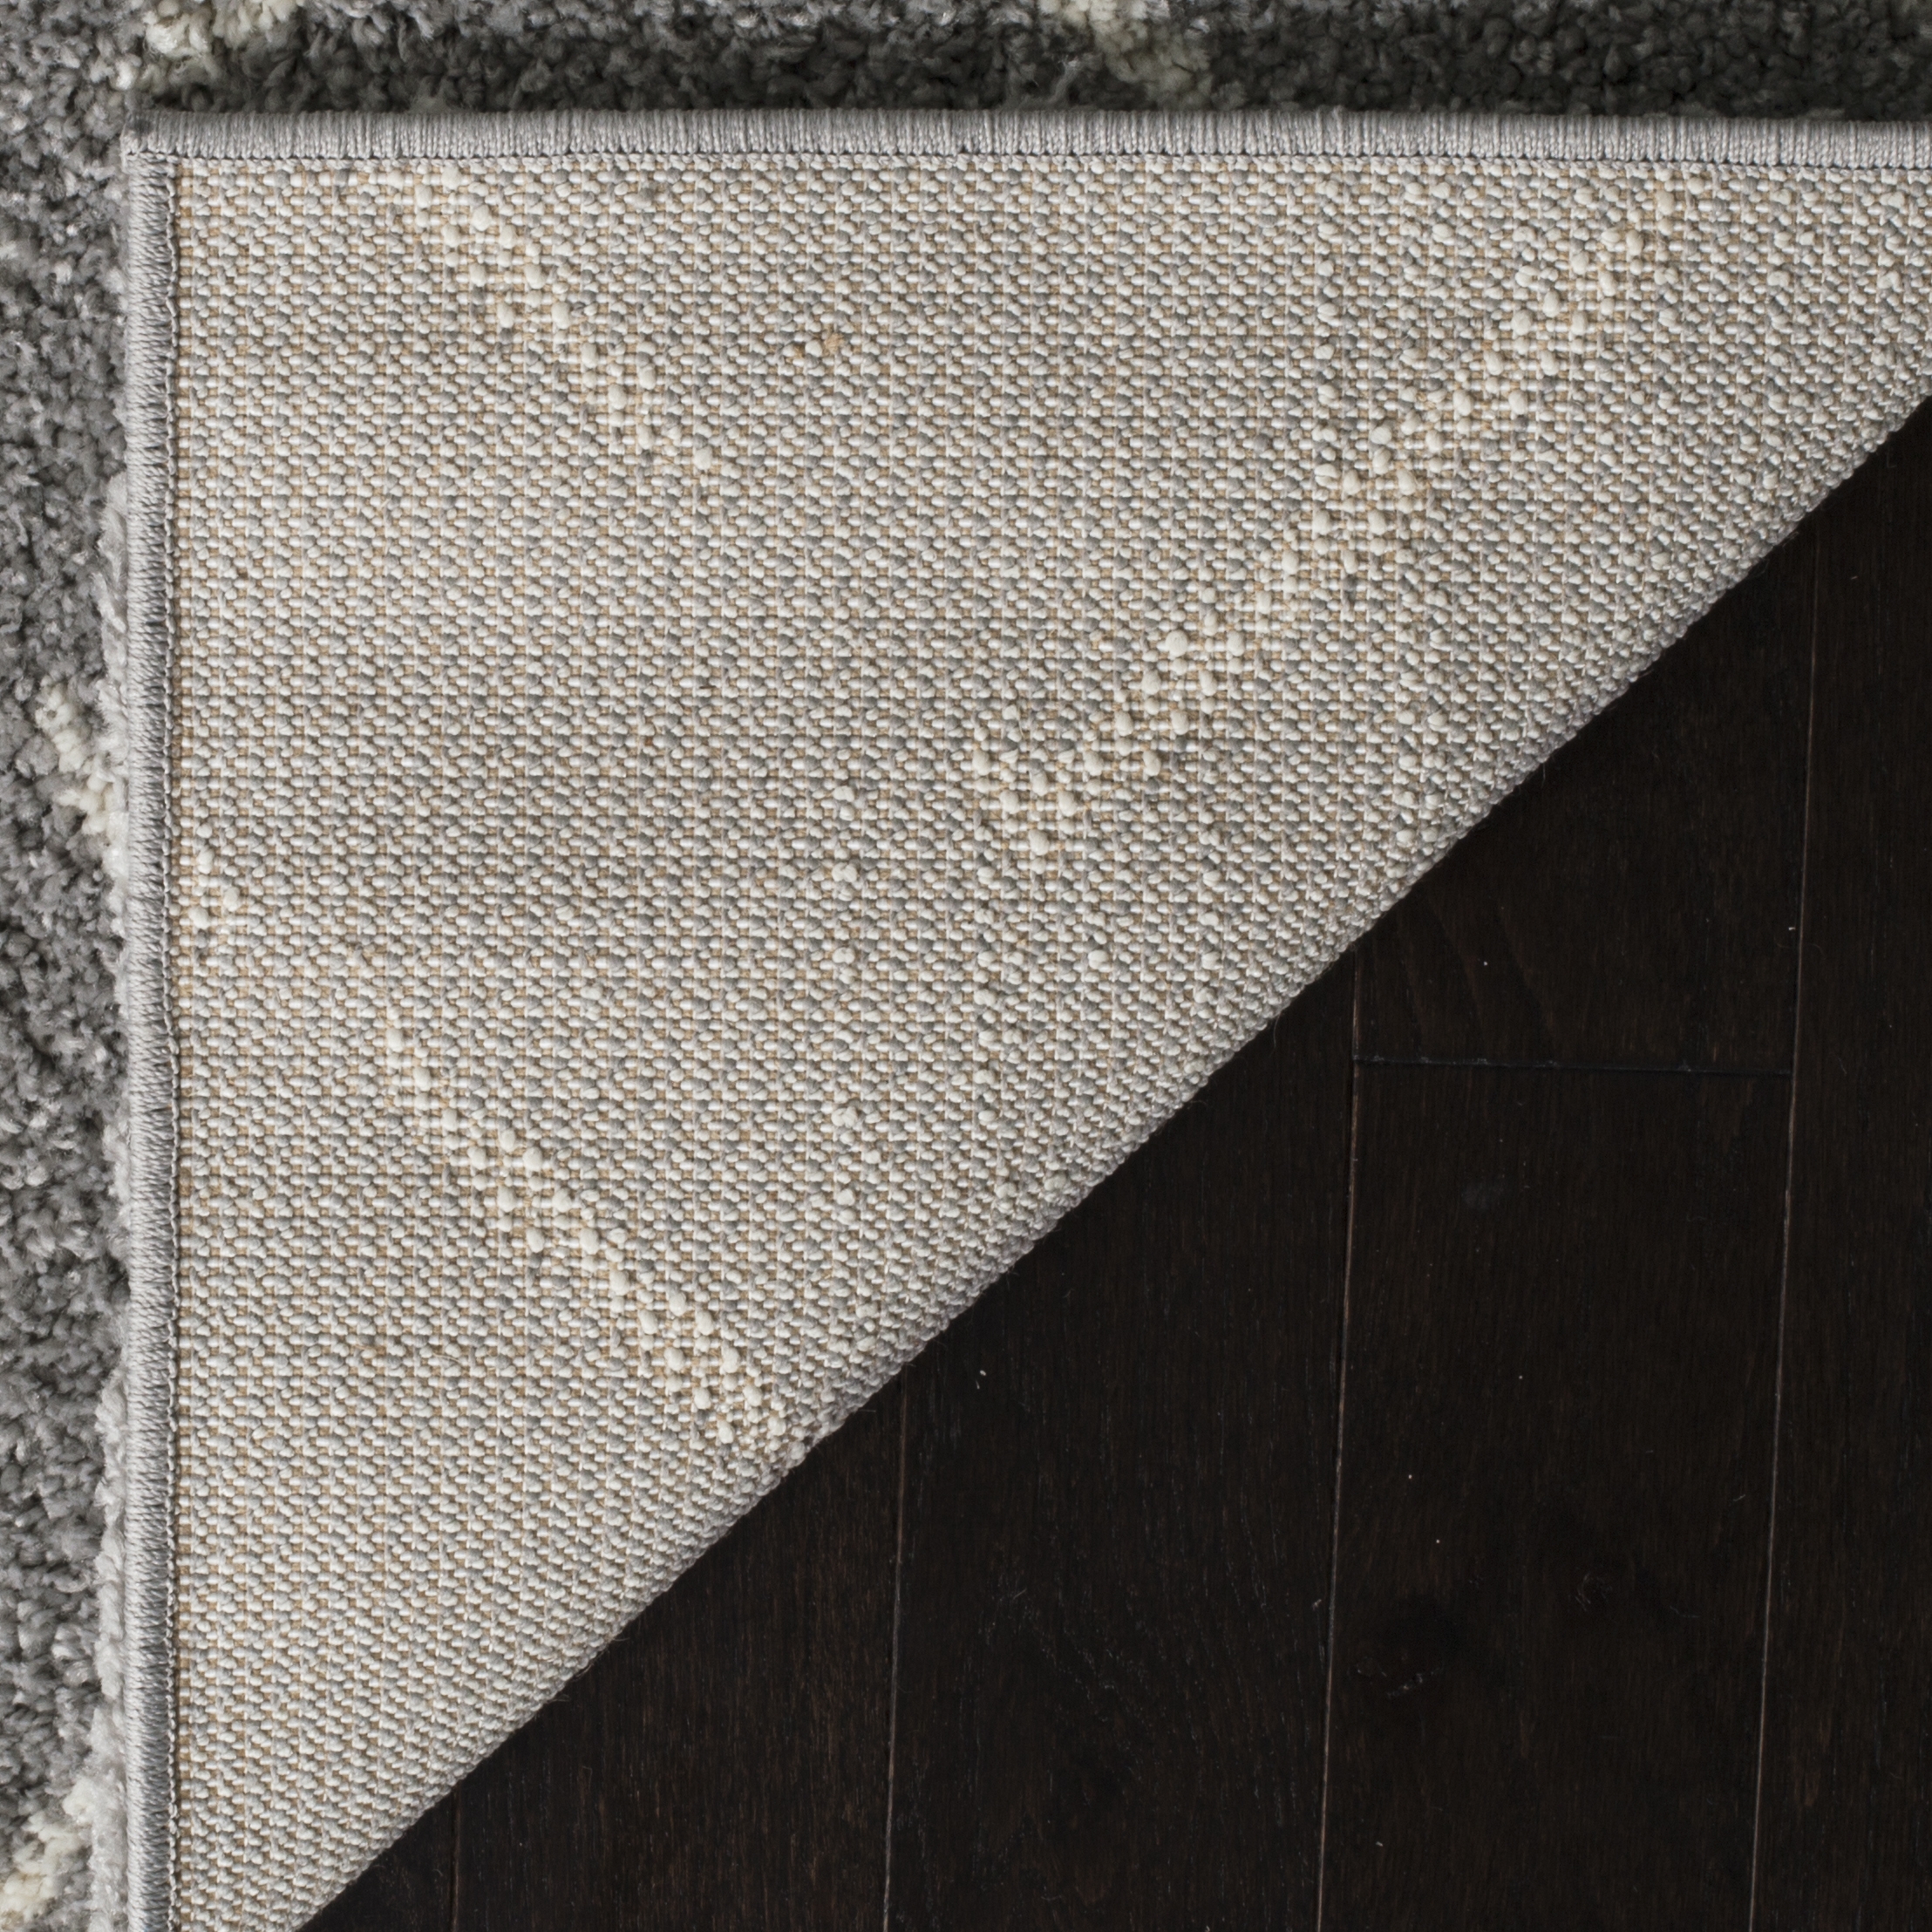 Arlo Home Woven Area Rug, ASG743D, Grey/Ivory,  10' X 14' - Image 2